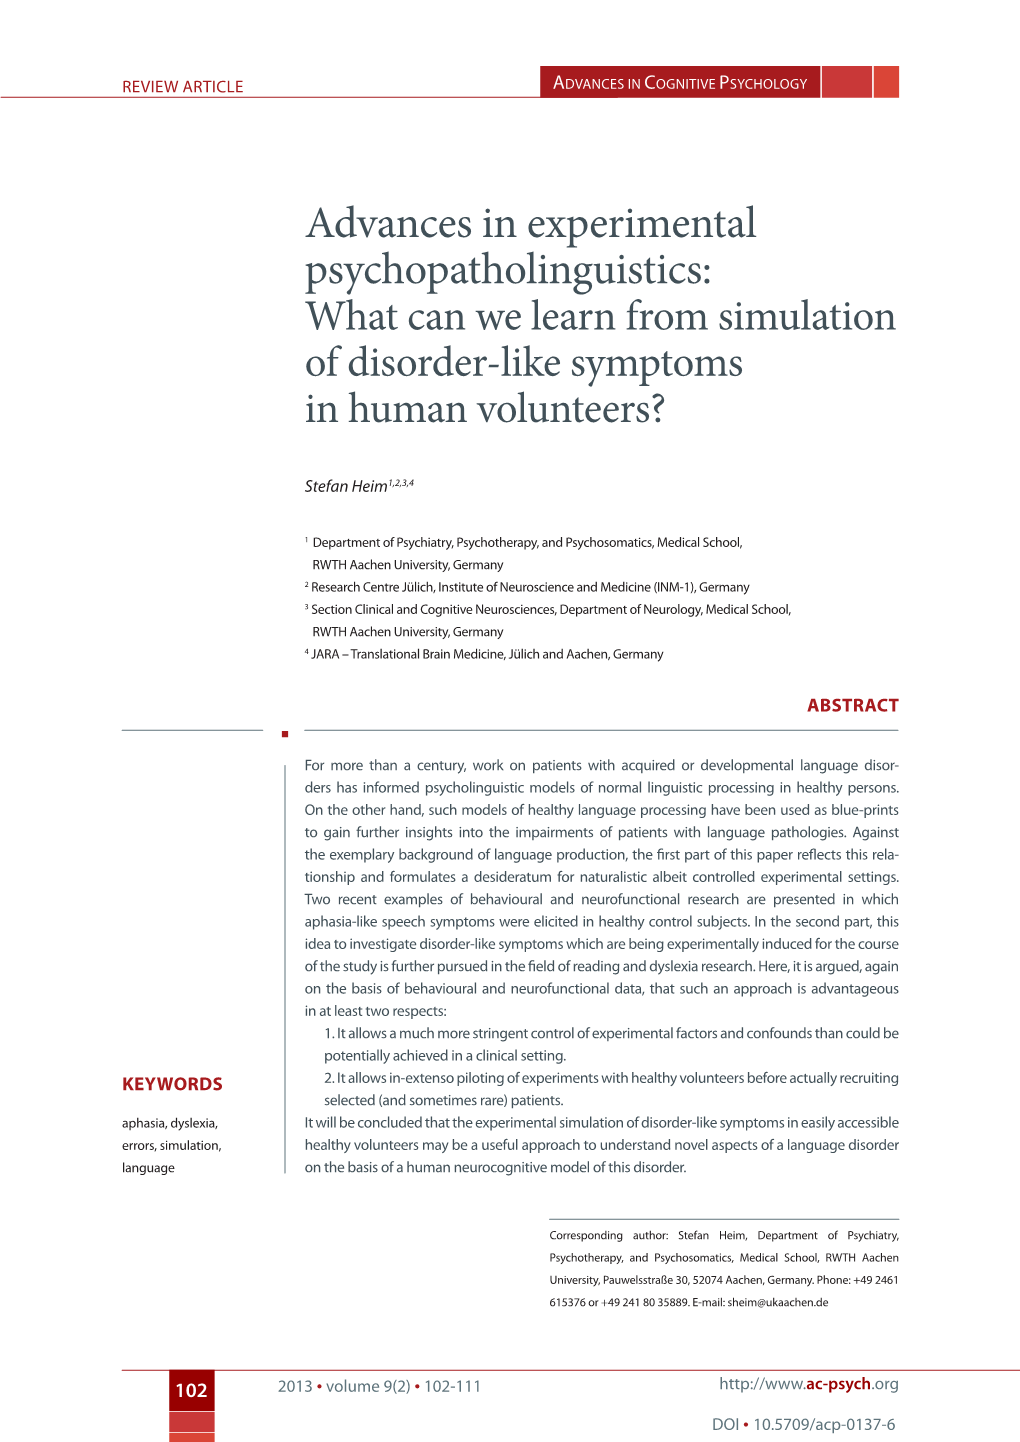 Advances in Experimental Psychopatholinguistics: What Can We Learn from Simulation of Disorder-Like Symptoms in Human Volunteers?